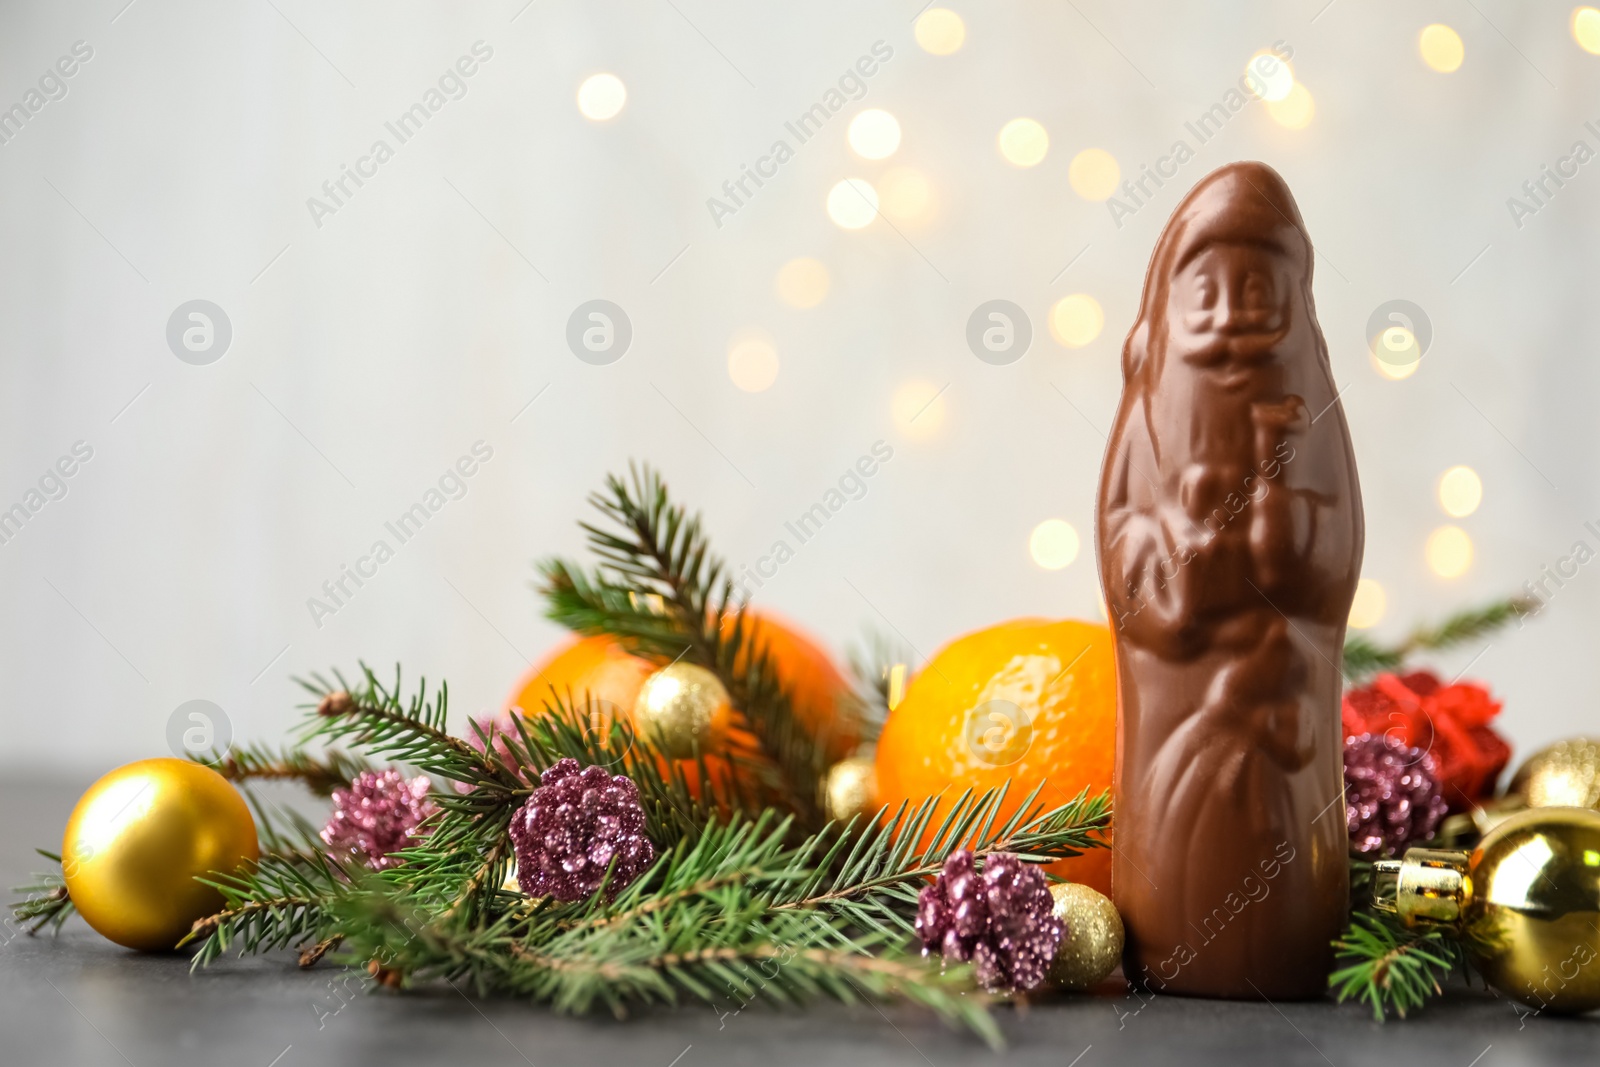 Photo of Composition with chocolate Santa Claus, tangerine fruits and Christmas decorations on light grey background, space for text